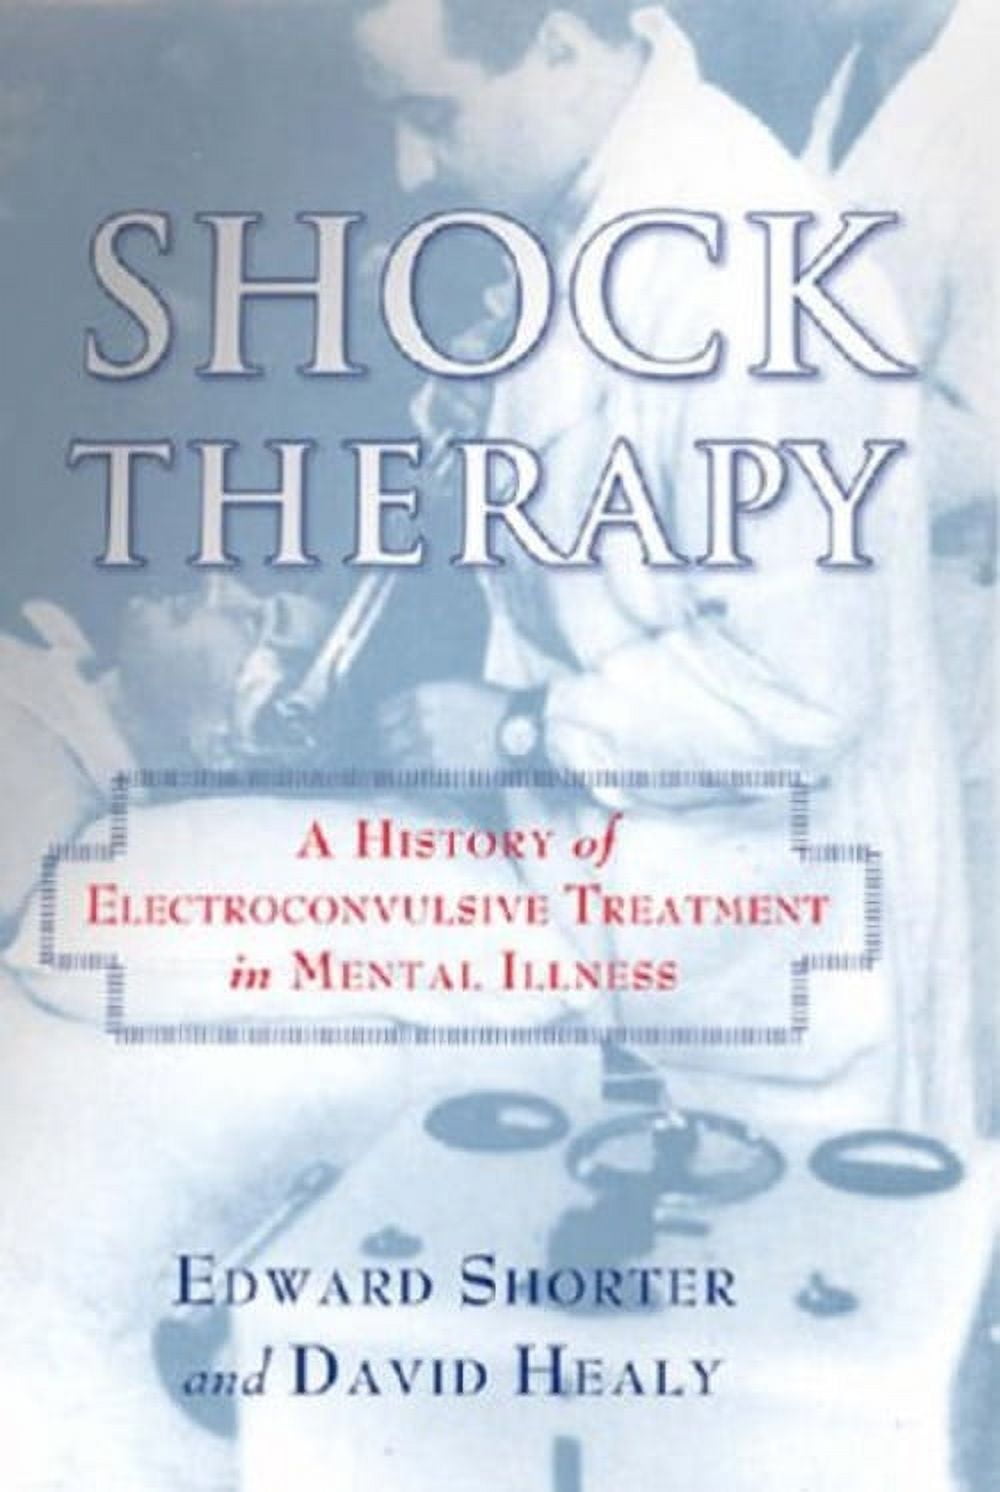 The History of Shock Therapy in Psychiatry